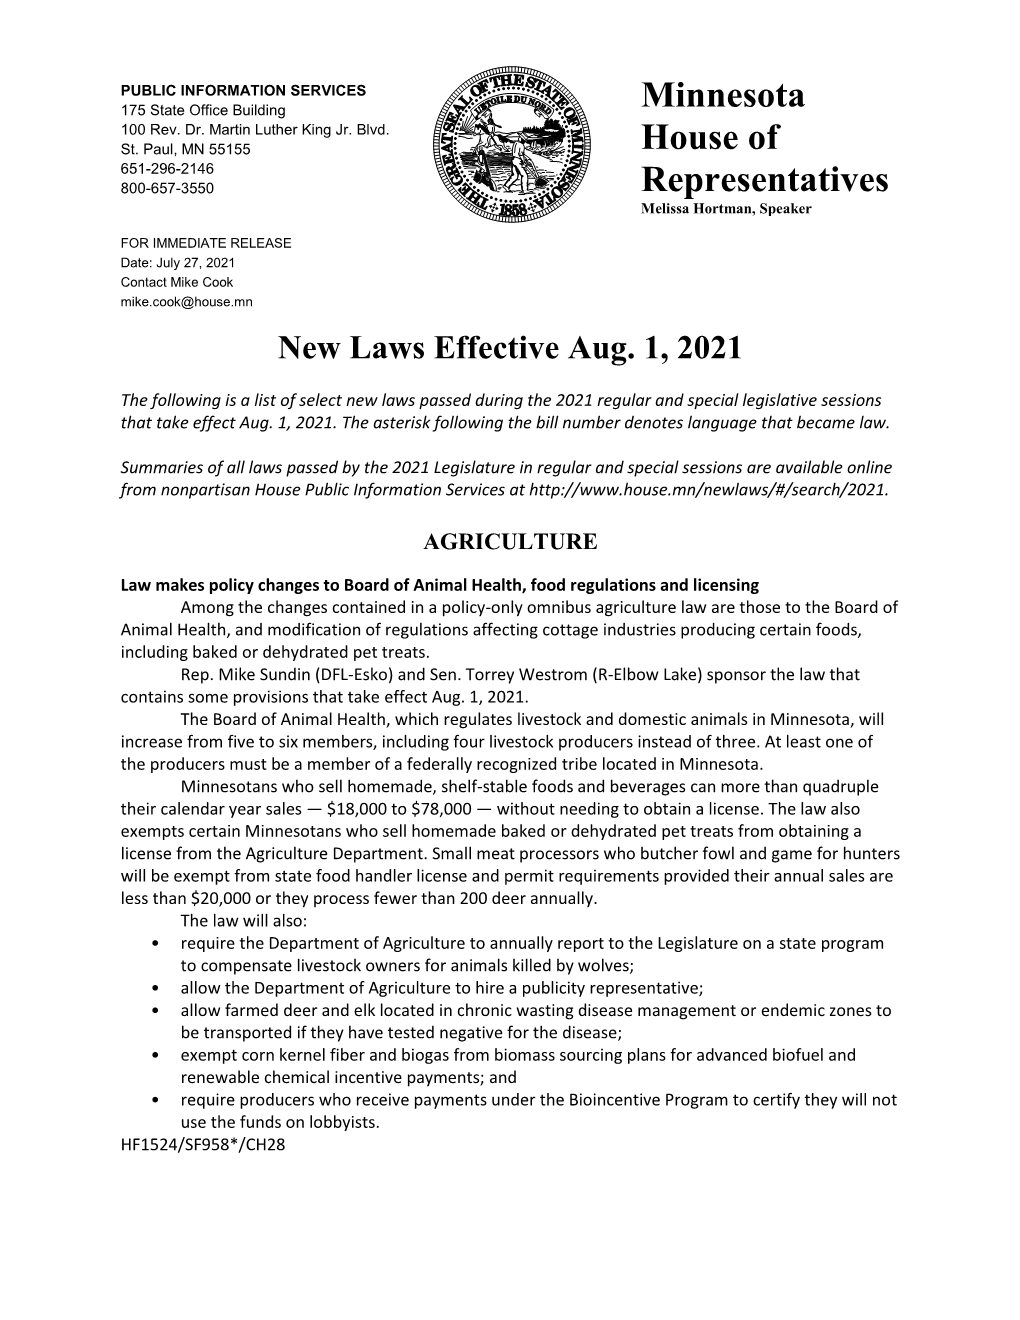 New Laws Effective Aug. 1, 2021